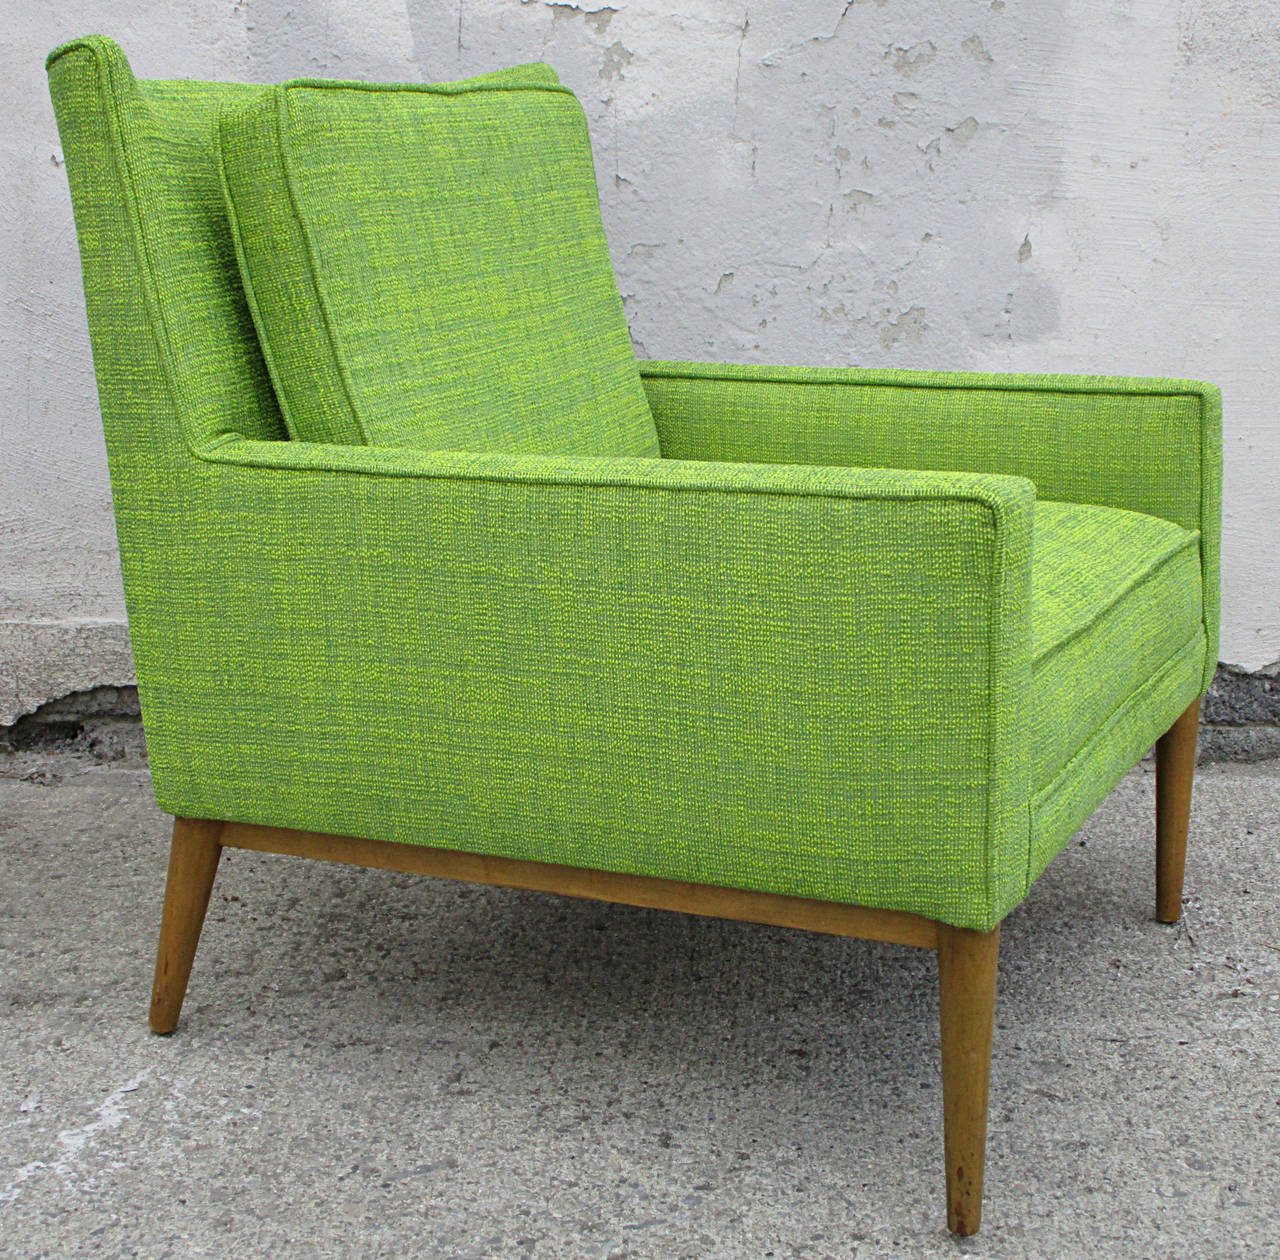 Paul McCobb lounge chair model 302 for Directional. Newly upholstered.